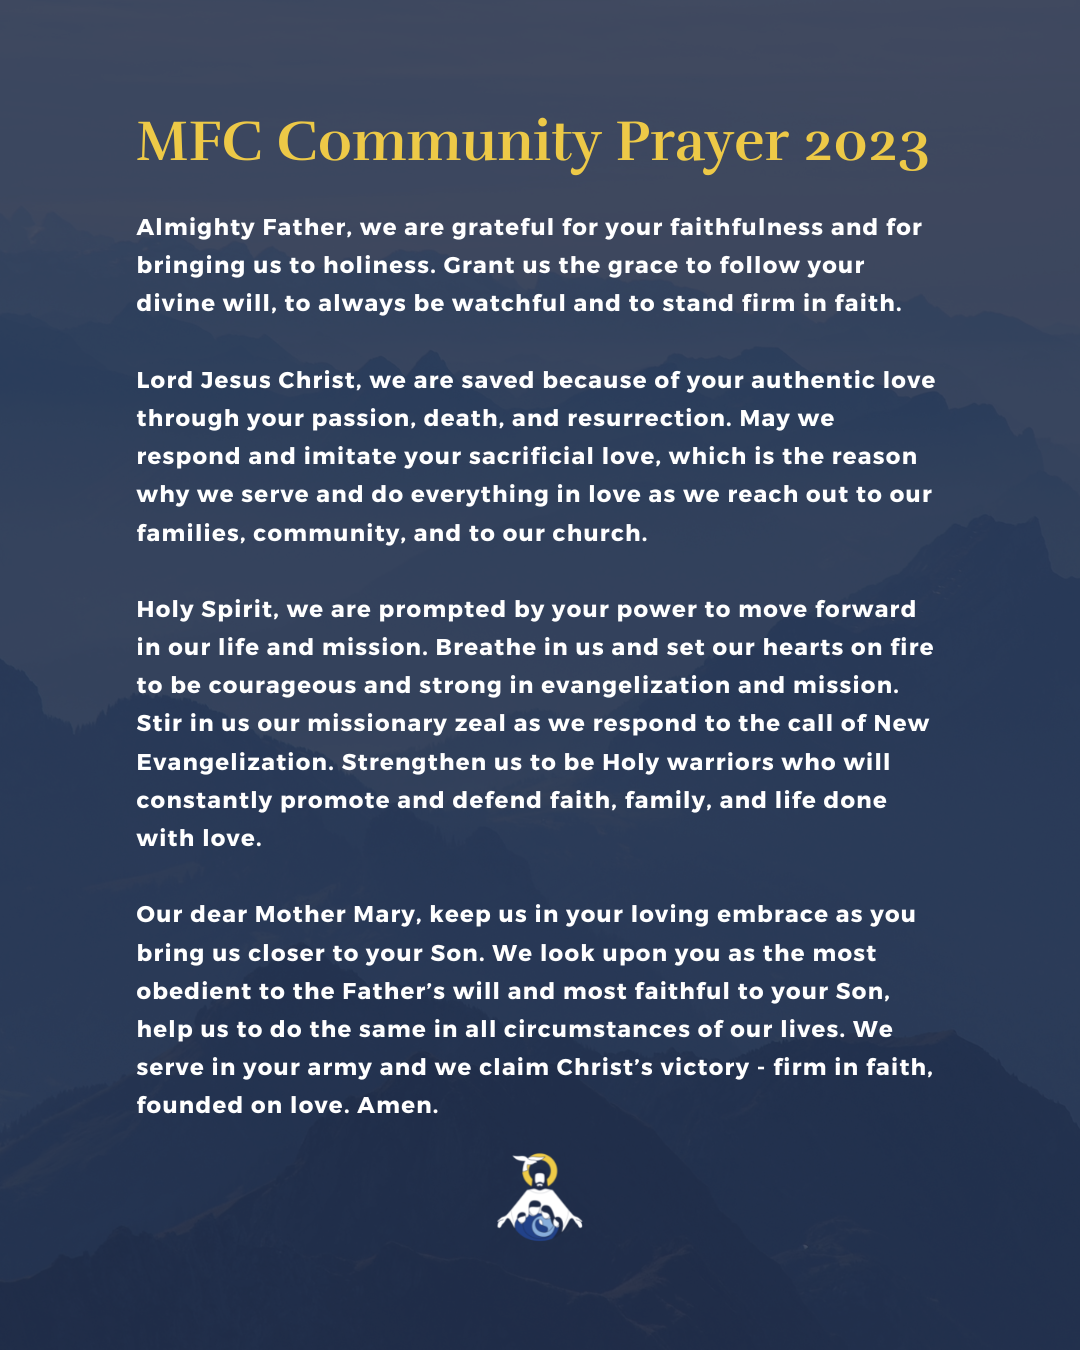 https://missionaryfamiliesofchrist.org/wp-content/uploads/2022/12/MFC-Community-Prayer-2023.png